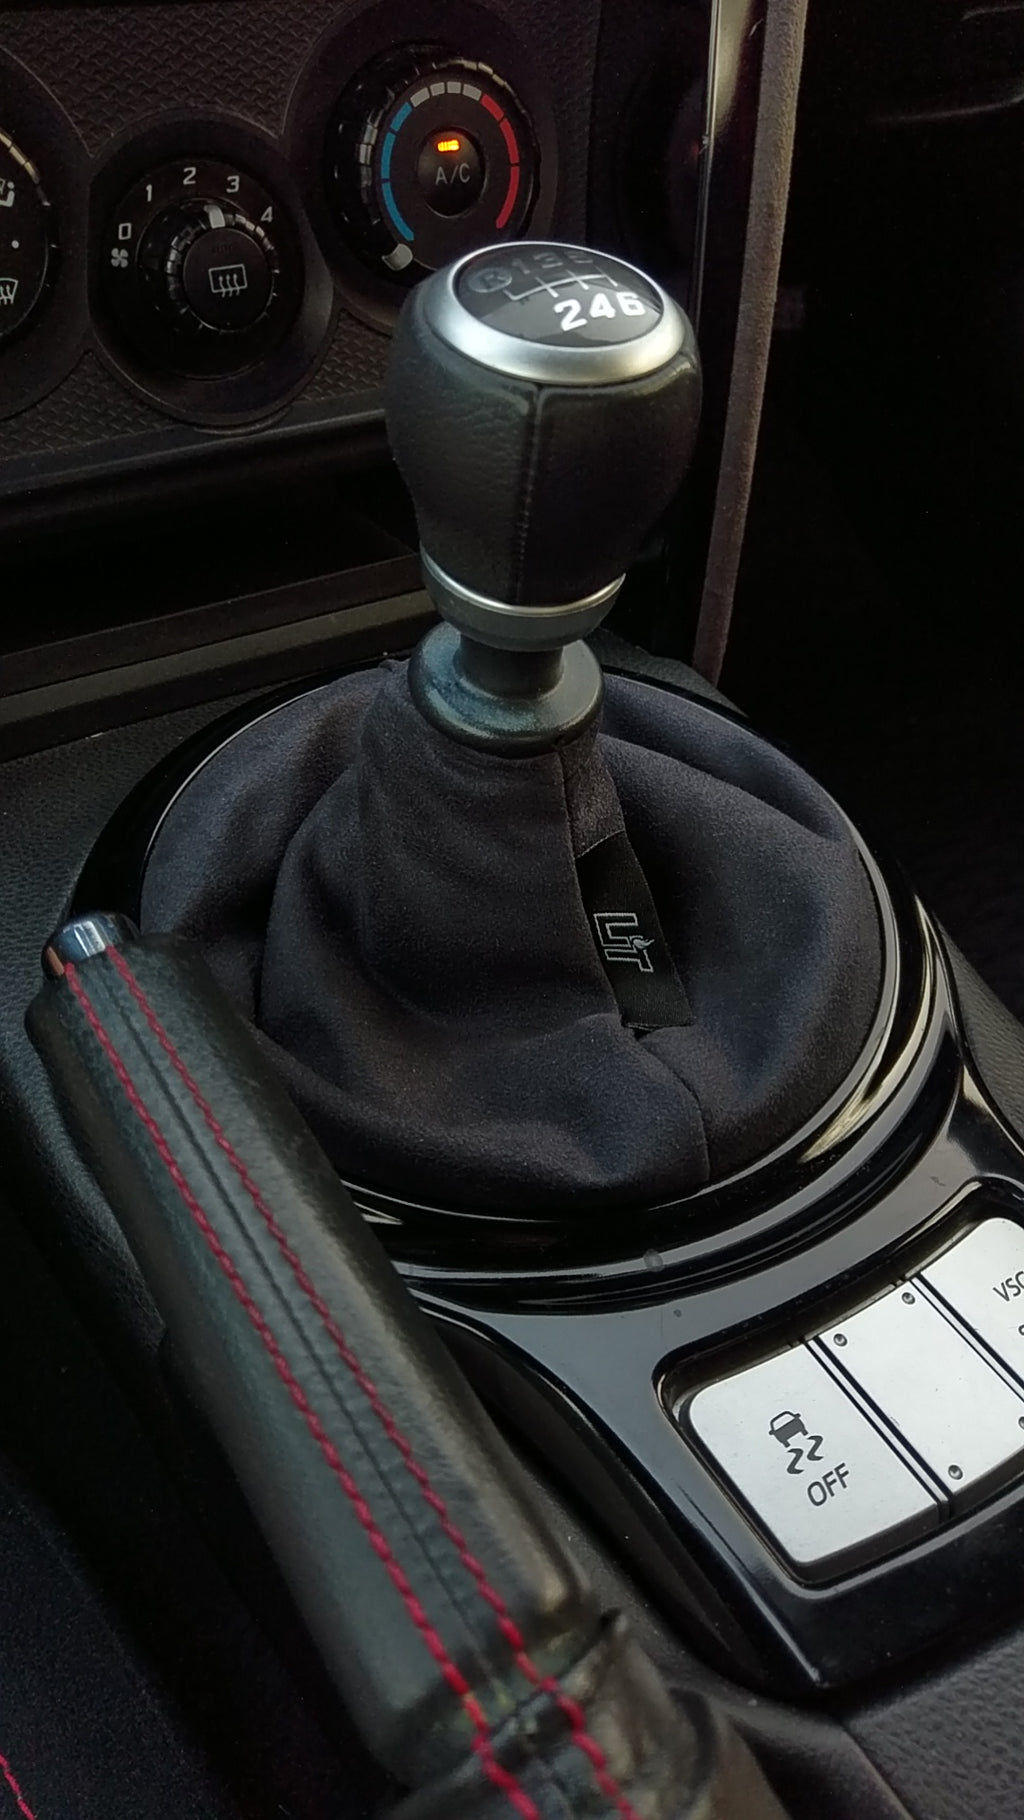 Black Suede Shift Boot , shift boot cover , shift boot cover for automatic , shift boot  wrx , shift boot cover gt86 , shift boot and ebrake boot , gear shift boot cover , jdm shift boot cover , gt86 shift boot , brz shift boot , sti shift boot , gtr shift boot , supra shift boot , silvia s13 shift boot , silvia s14 shift boot , 350z shift boot cover , 370z shift boot , shift boot retainer , shift boot ring , shift boot for cars , evo shift boot cover , dsg shift boot cover , universal shift boot cover 